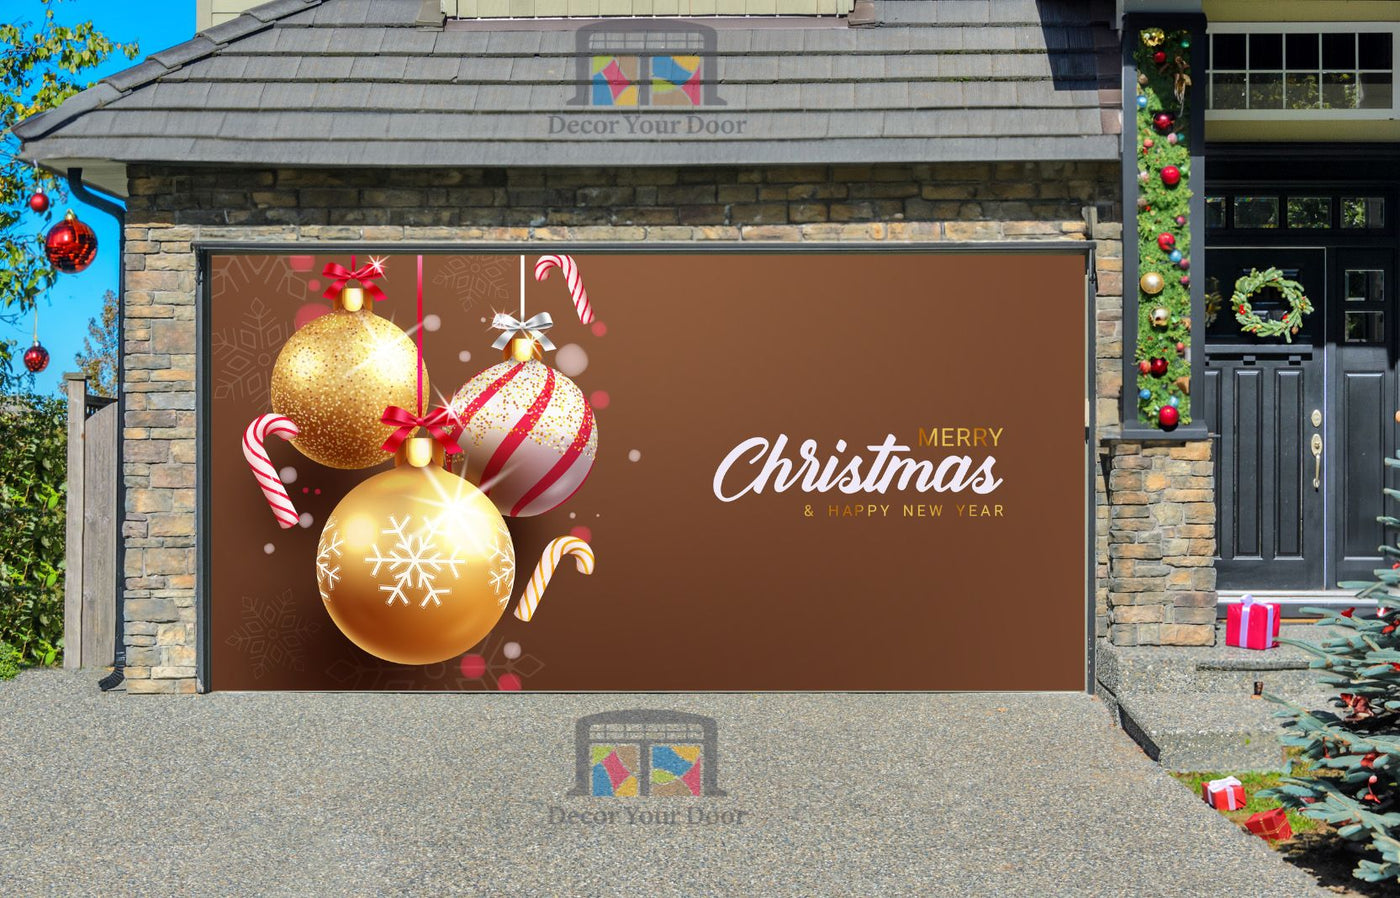 Merry Christmas Christmas In Glitter Gold Shiny Hanging Ornament Garage Door Wrap Cover Mural Decoration